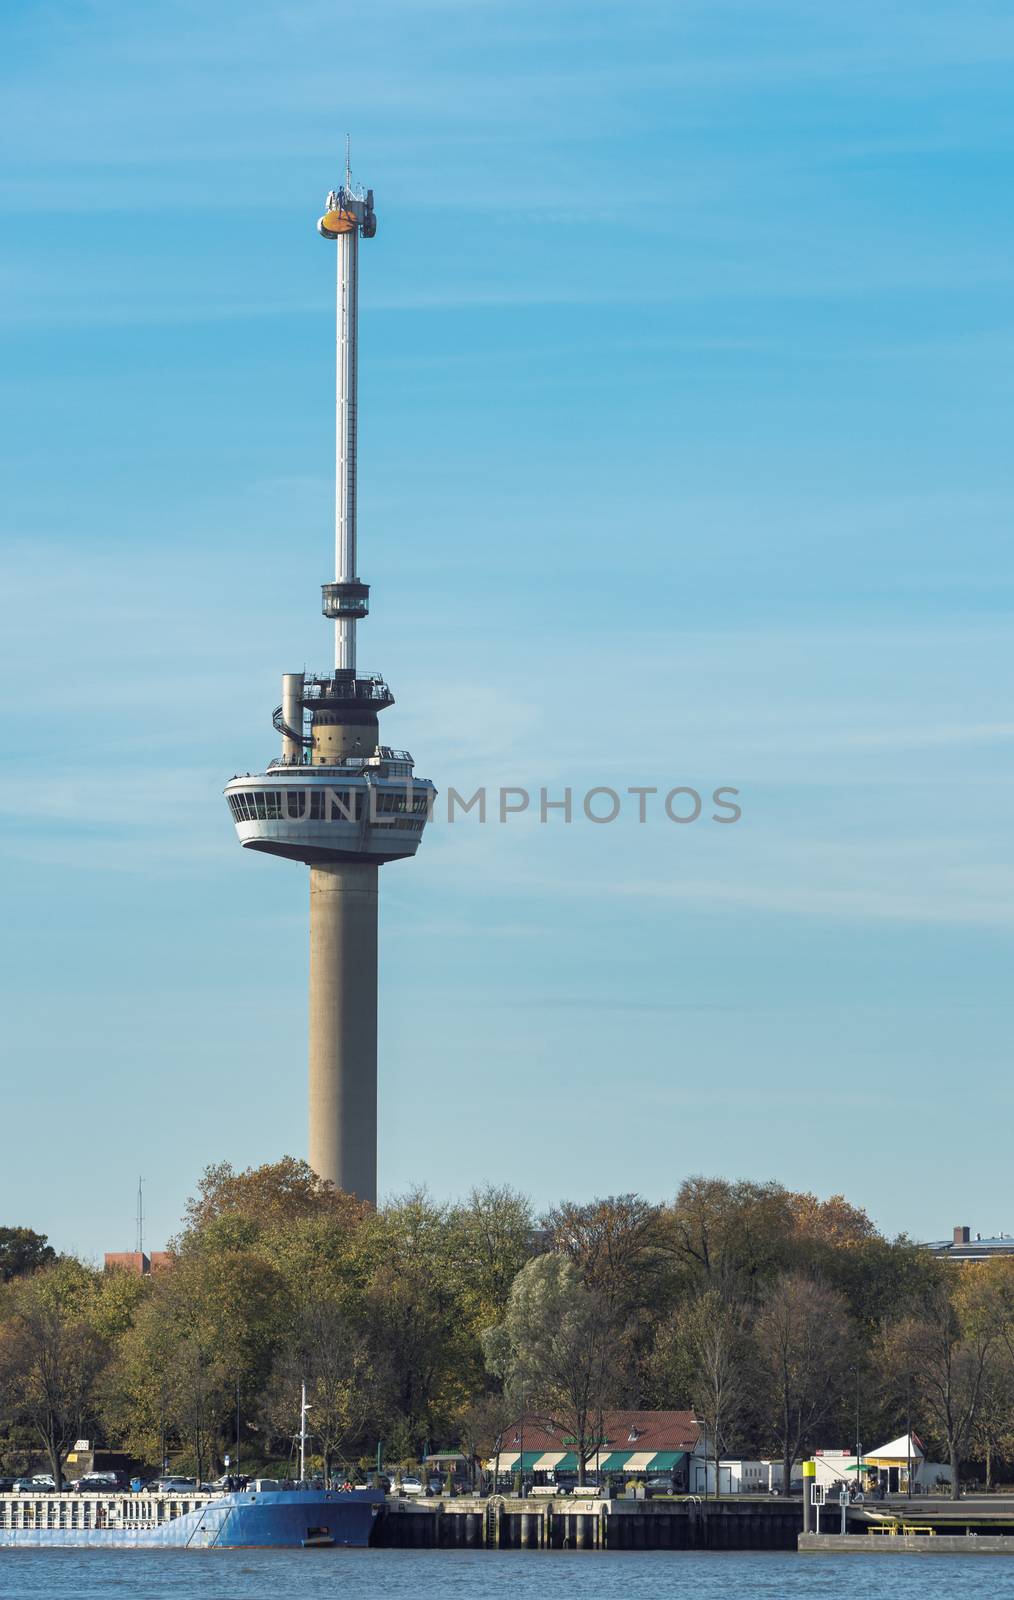 the euromast tower in Rotterdam, Holland, the tower is 185 meters high and has a restaurant and a viewpoint